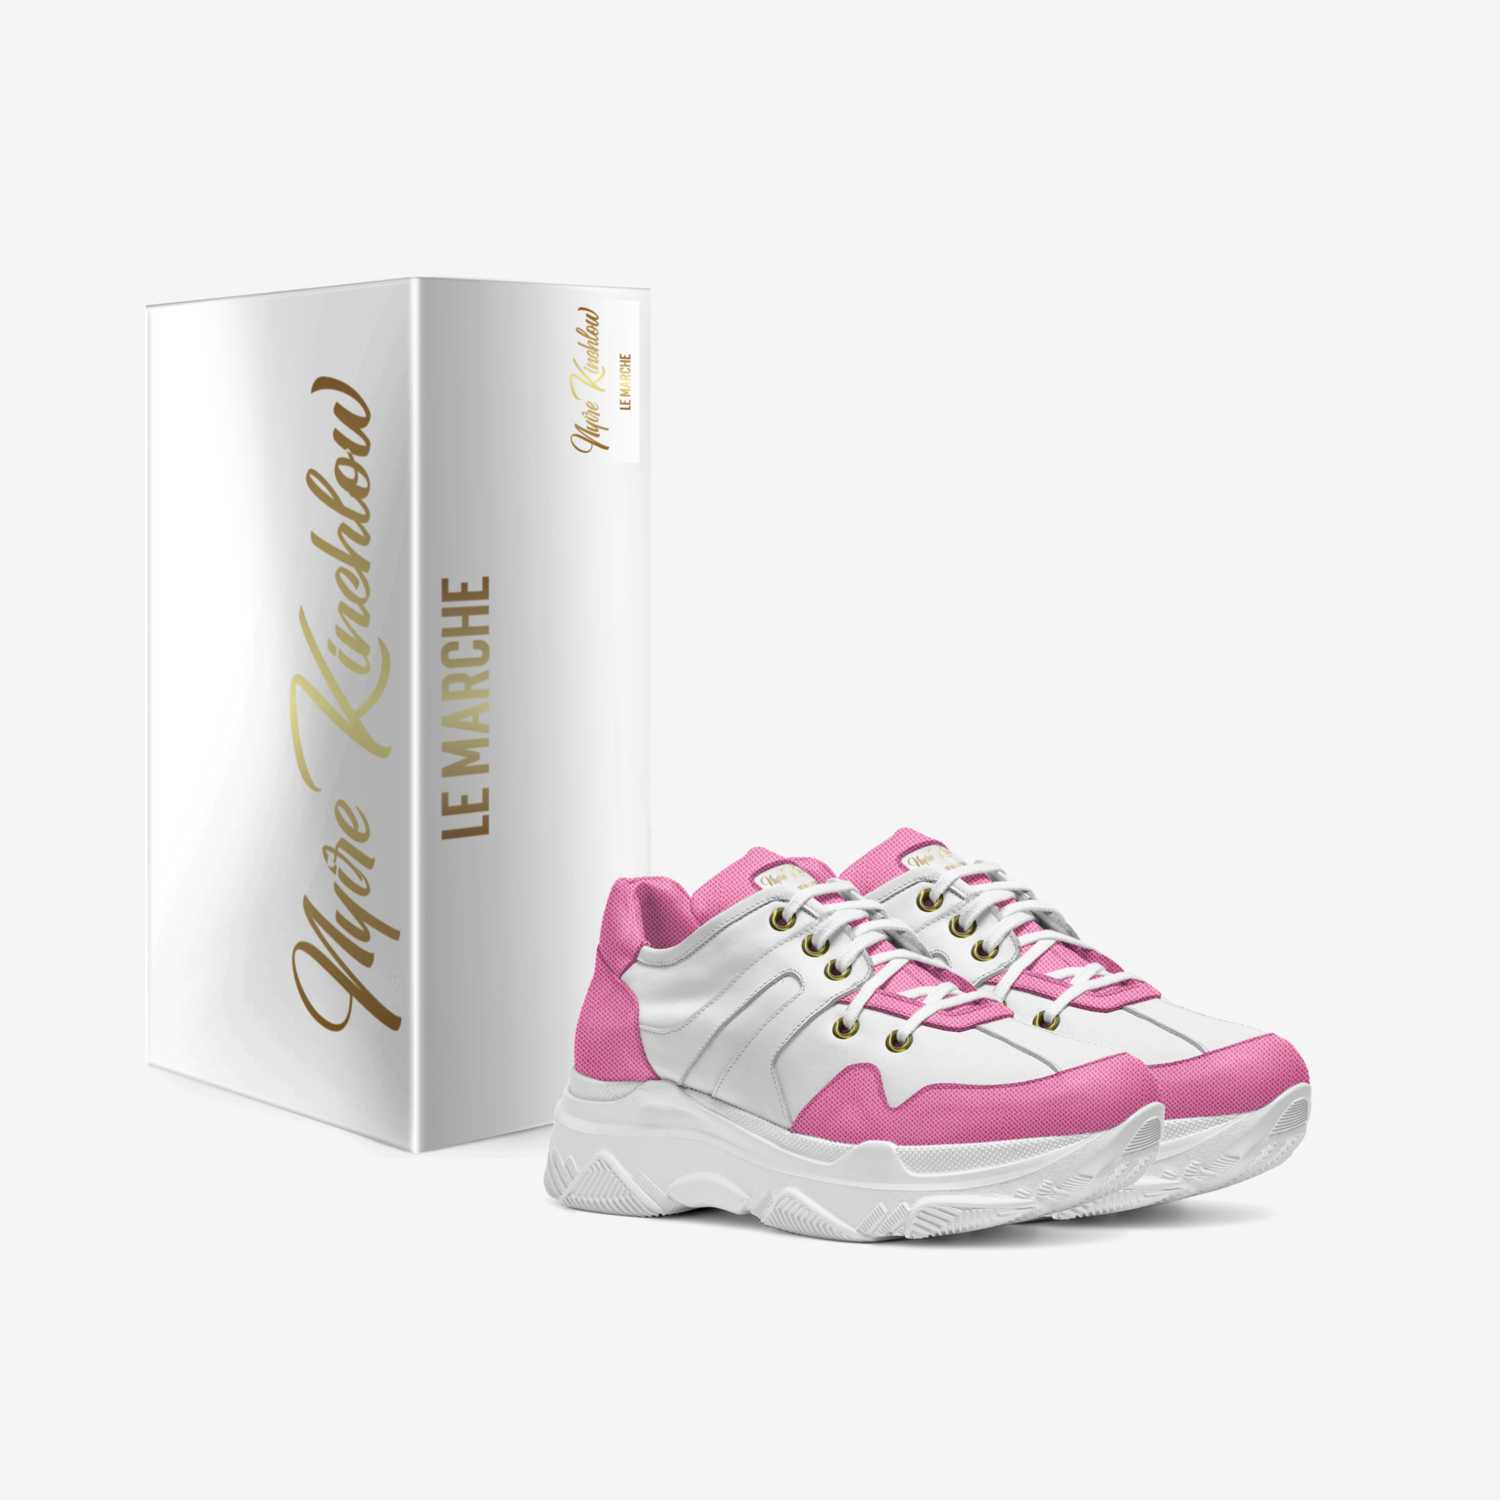 Pink Bubble Gum custom made in Italy shoes by Nyire Kinchlow | Box view